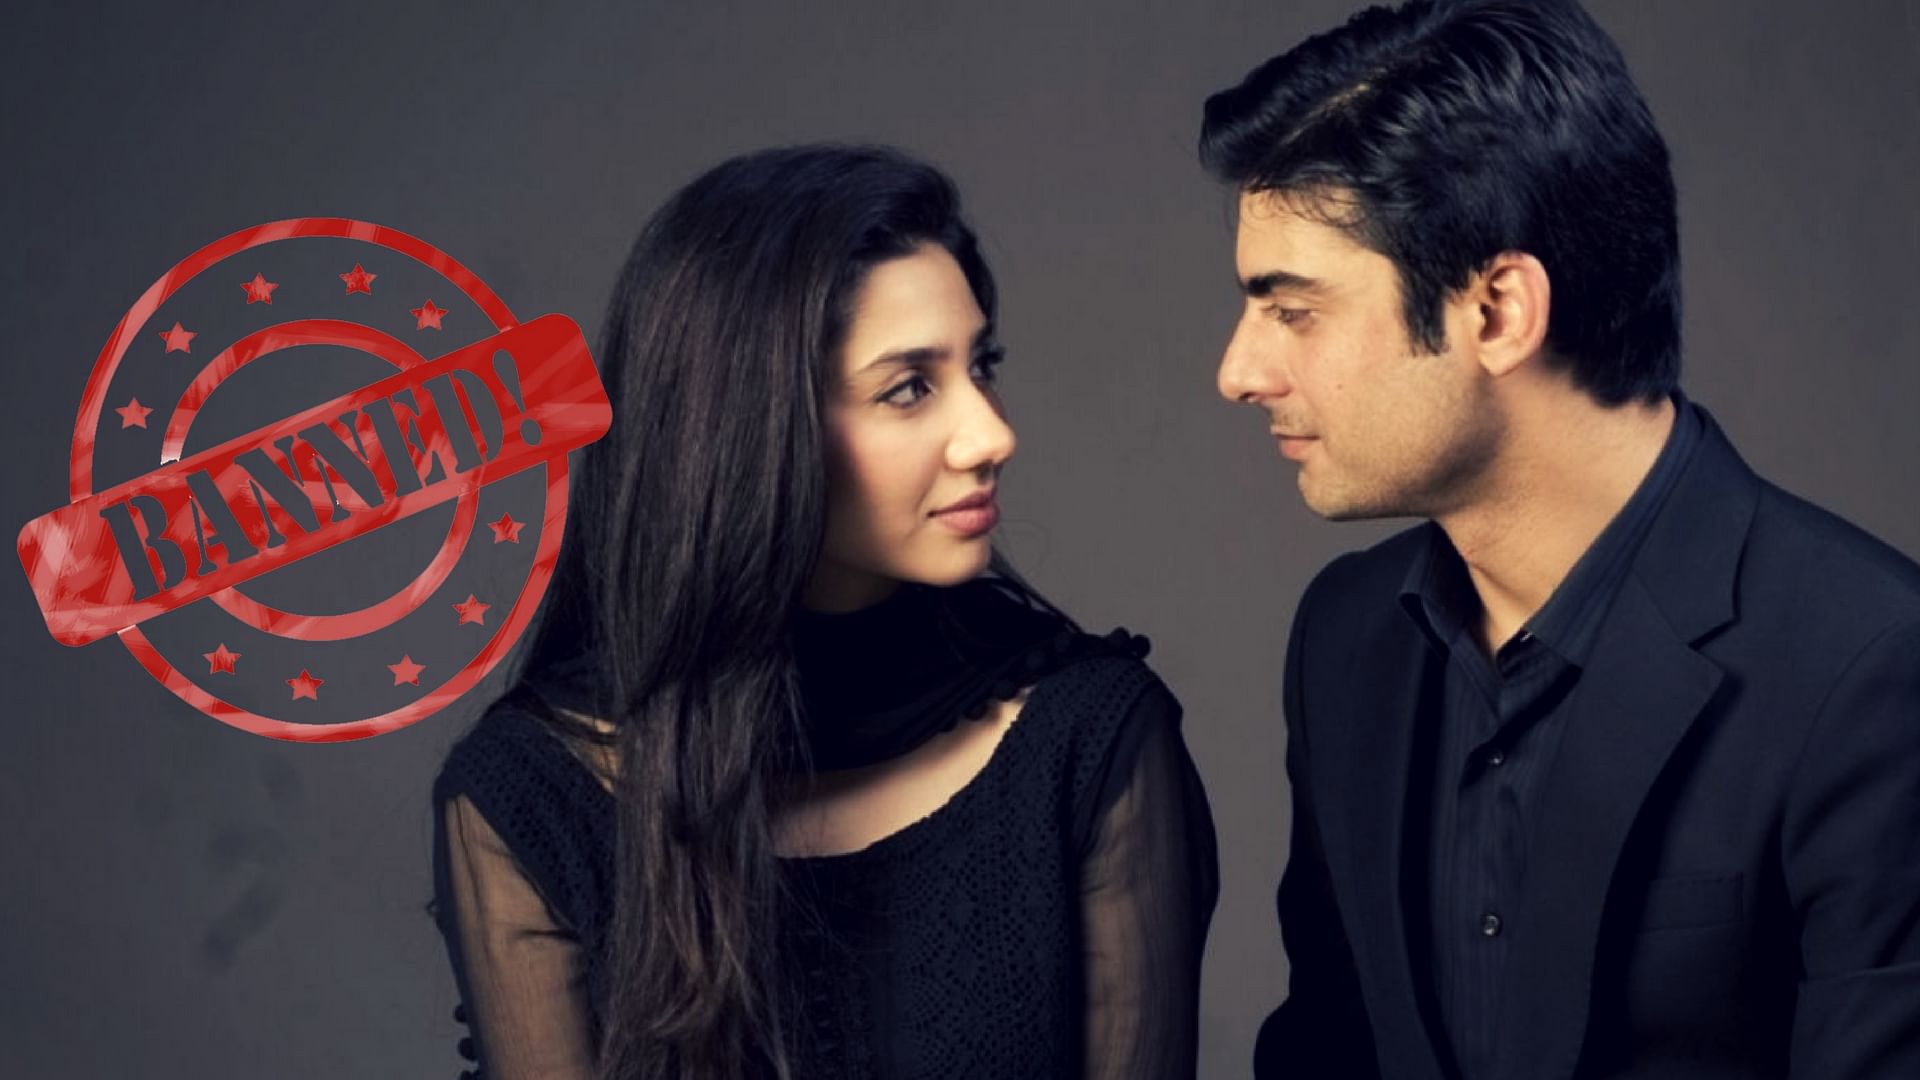 Pakistani artistes have been banned by Indian film producers till peace restores between India and Pakistan. (Photo: Promotional still from <i>Humsafar</i>; altered by The Quint)